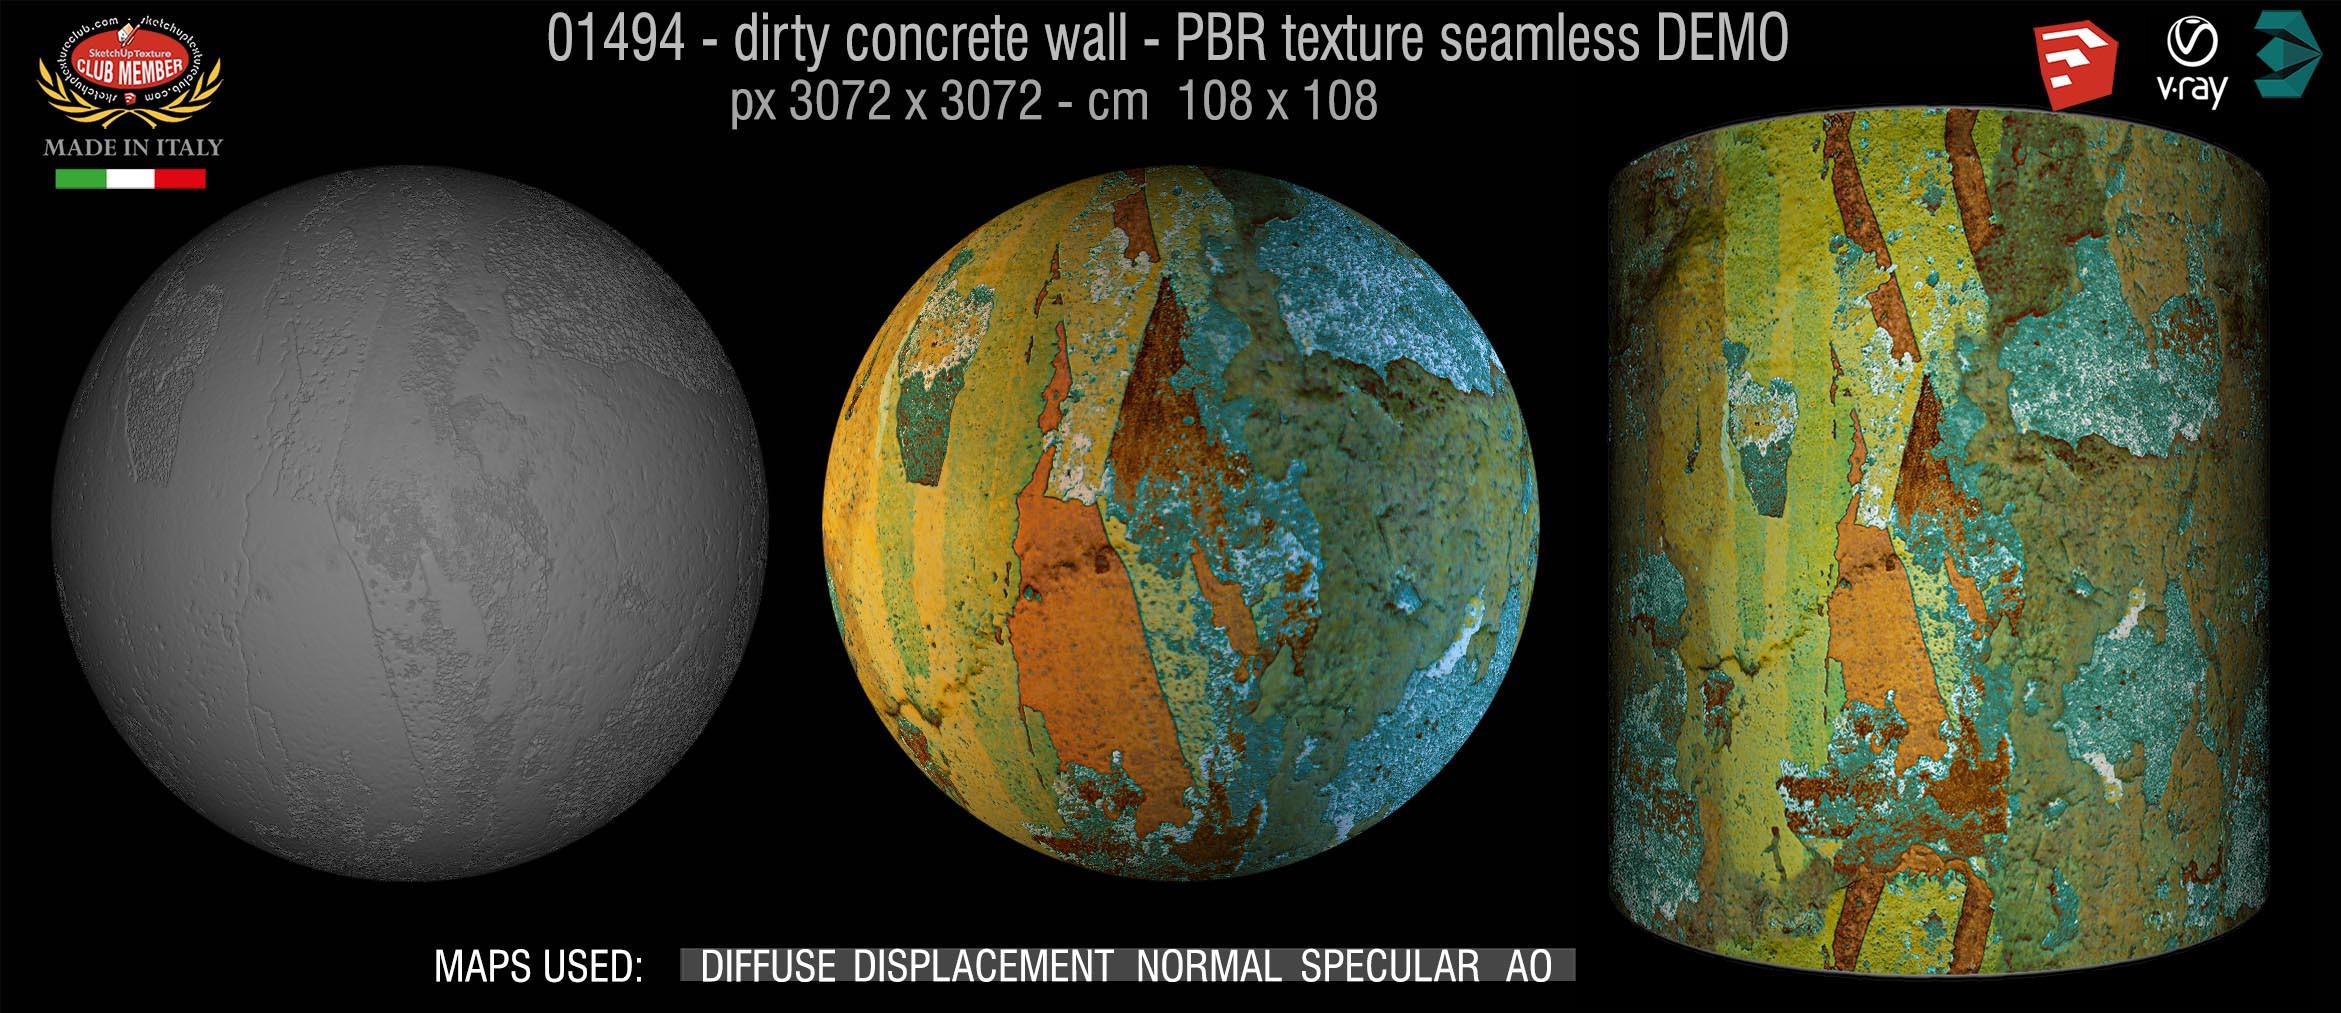 01494 Concrete bare dirty wall PBR texture seamless DEMO